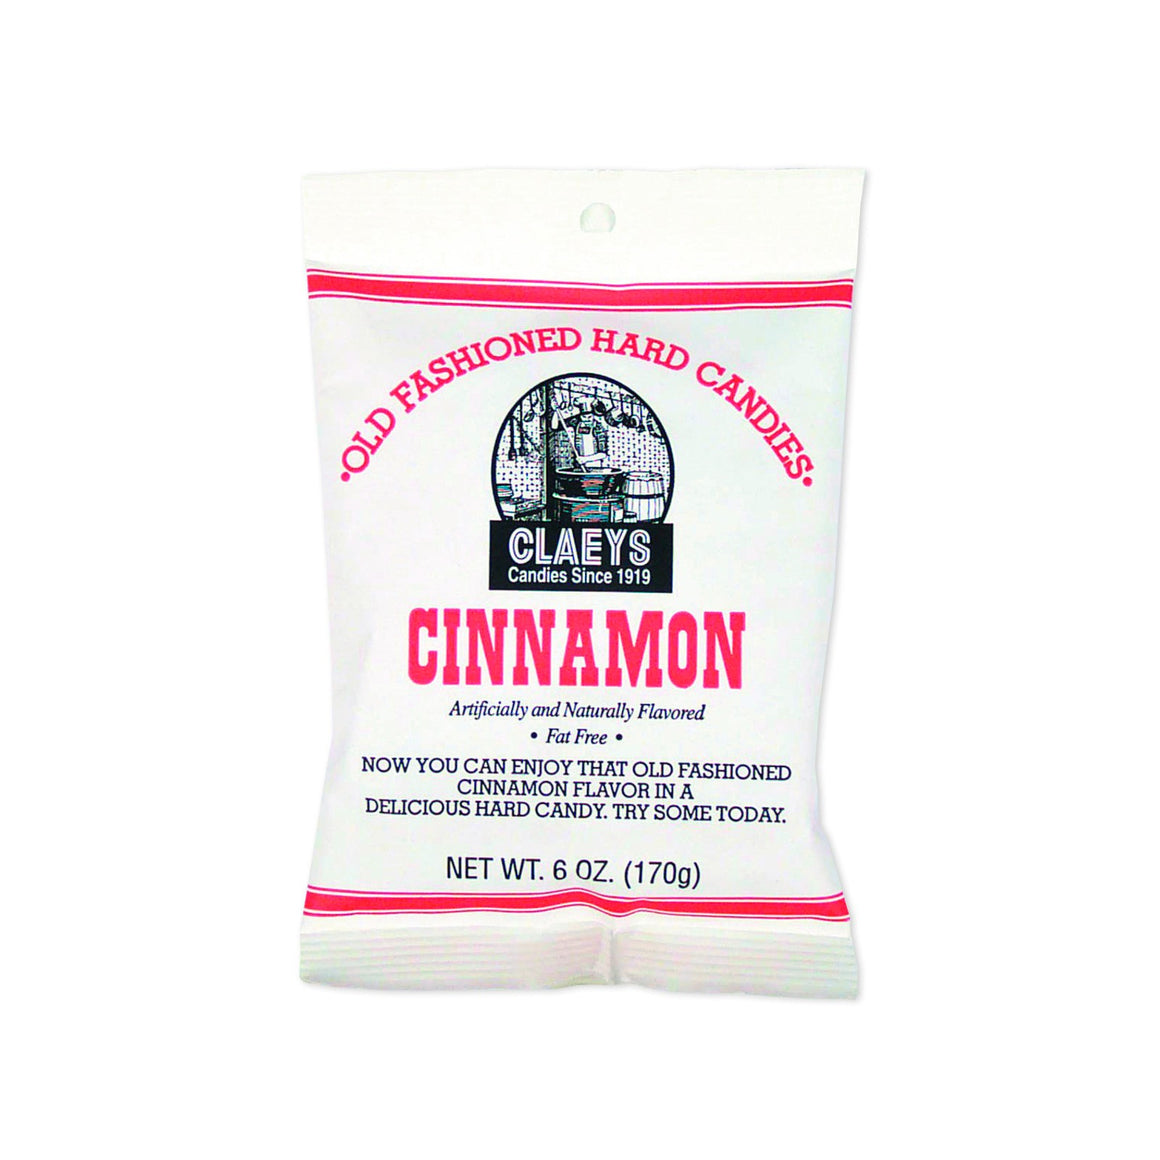 All City Candy Claeys Cinnamon Old Fashioned Hard Candies - 6-oz. Bag Hard Claeys Candies 1 Bag For fresh candy and great service, visit www.allcitycandy.com